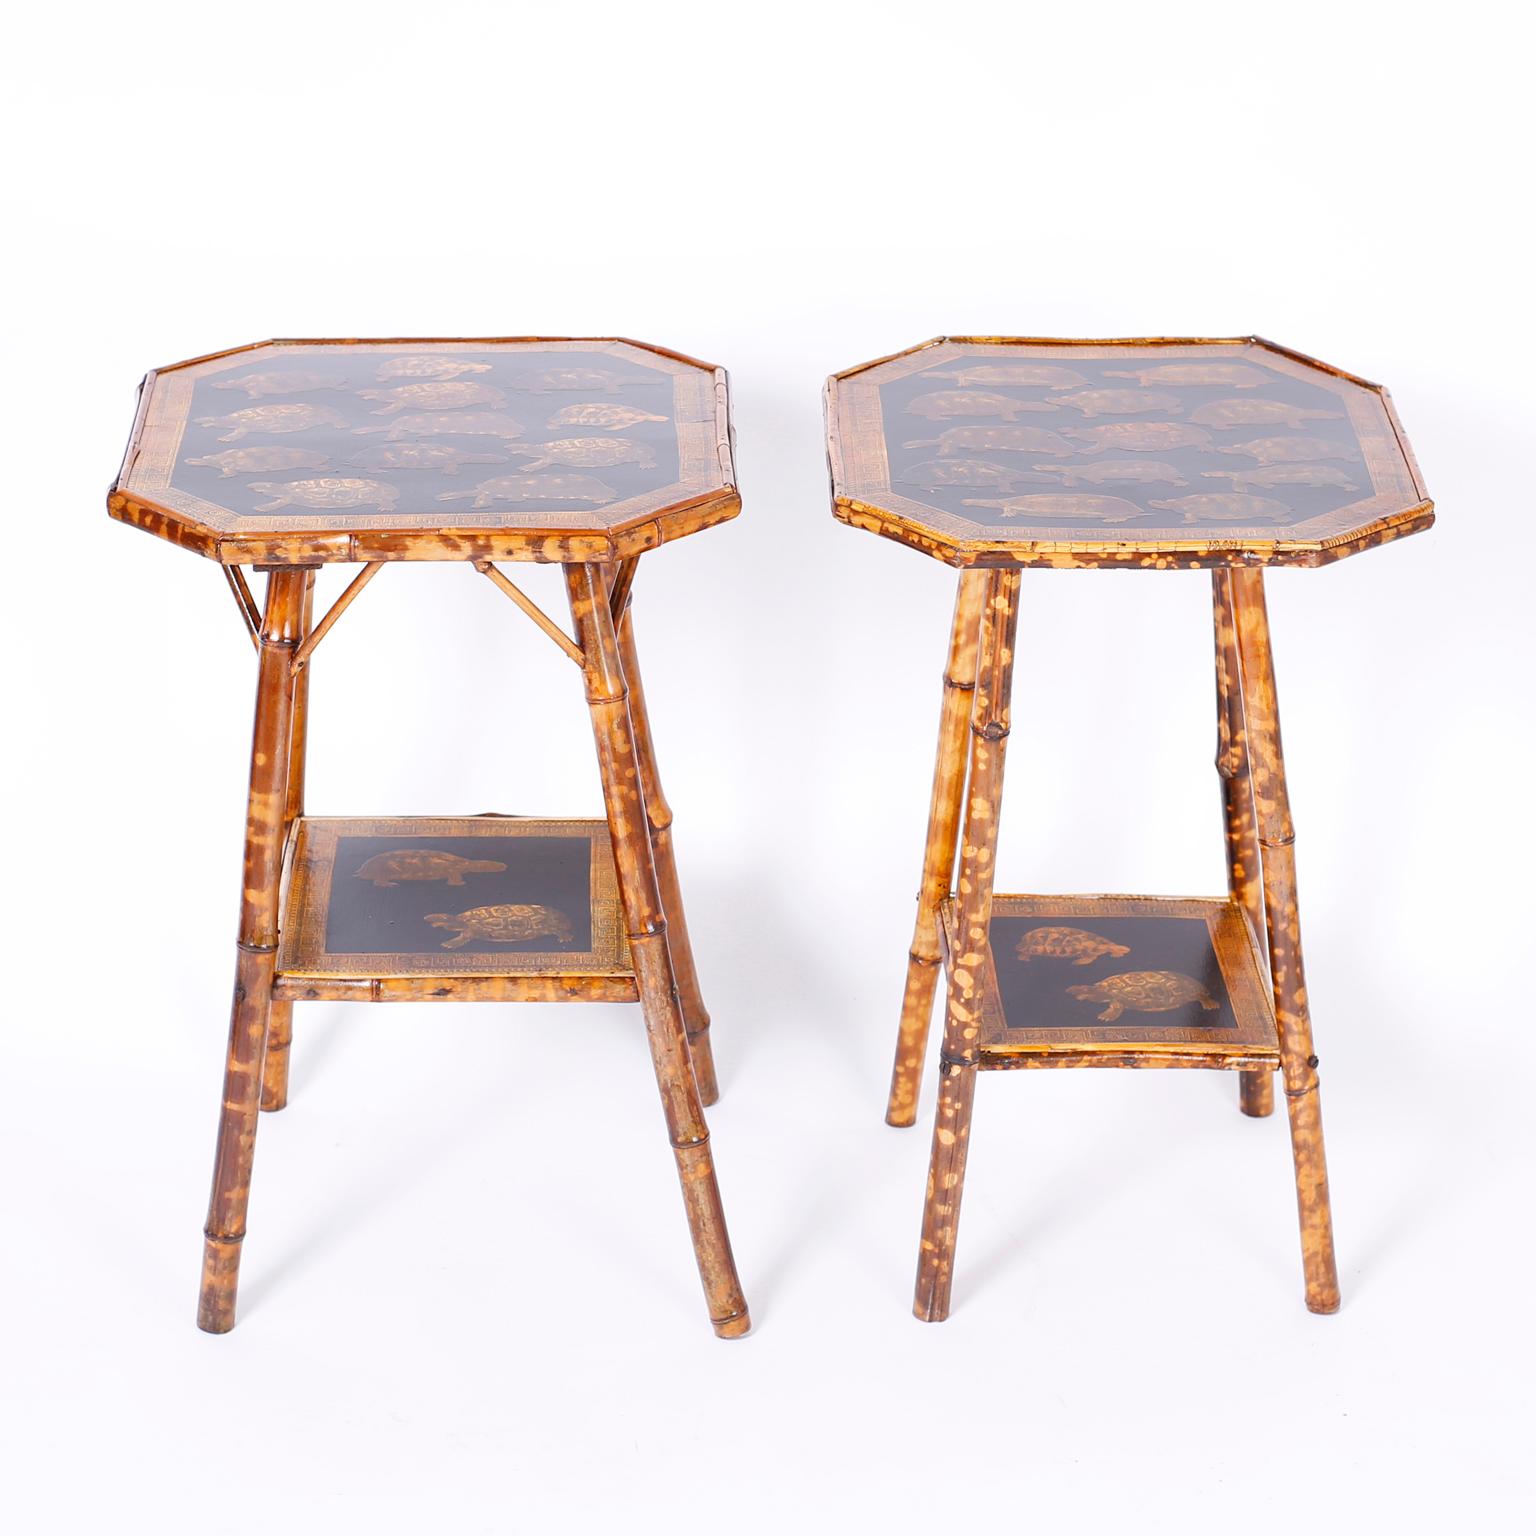 A near pair of English bamboo tables, each with two tiers having decoupage turtles on a black background.